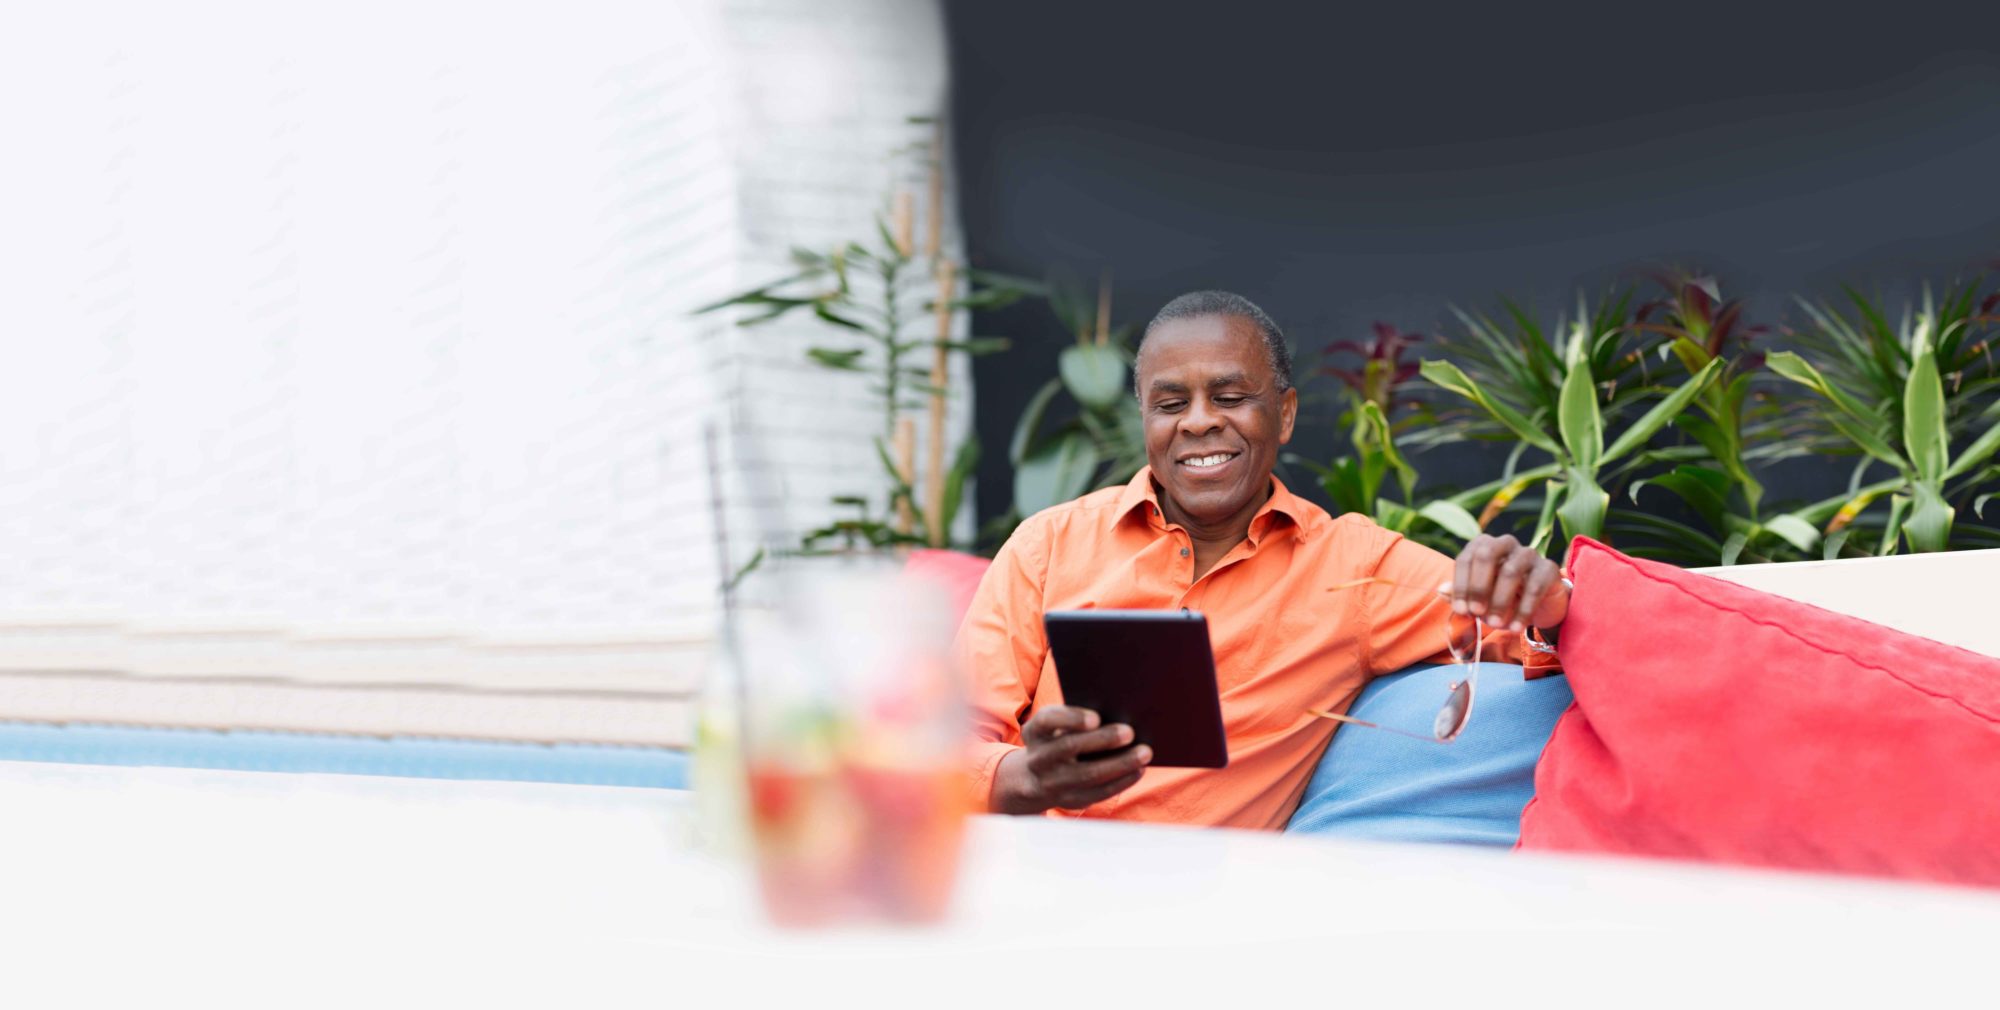 Relaxed man on ipad, generating income with options